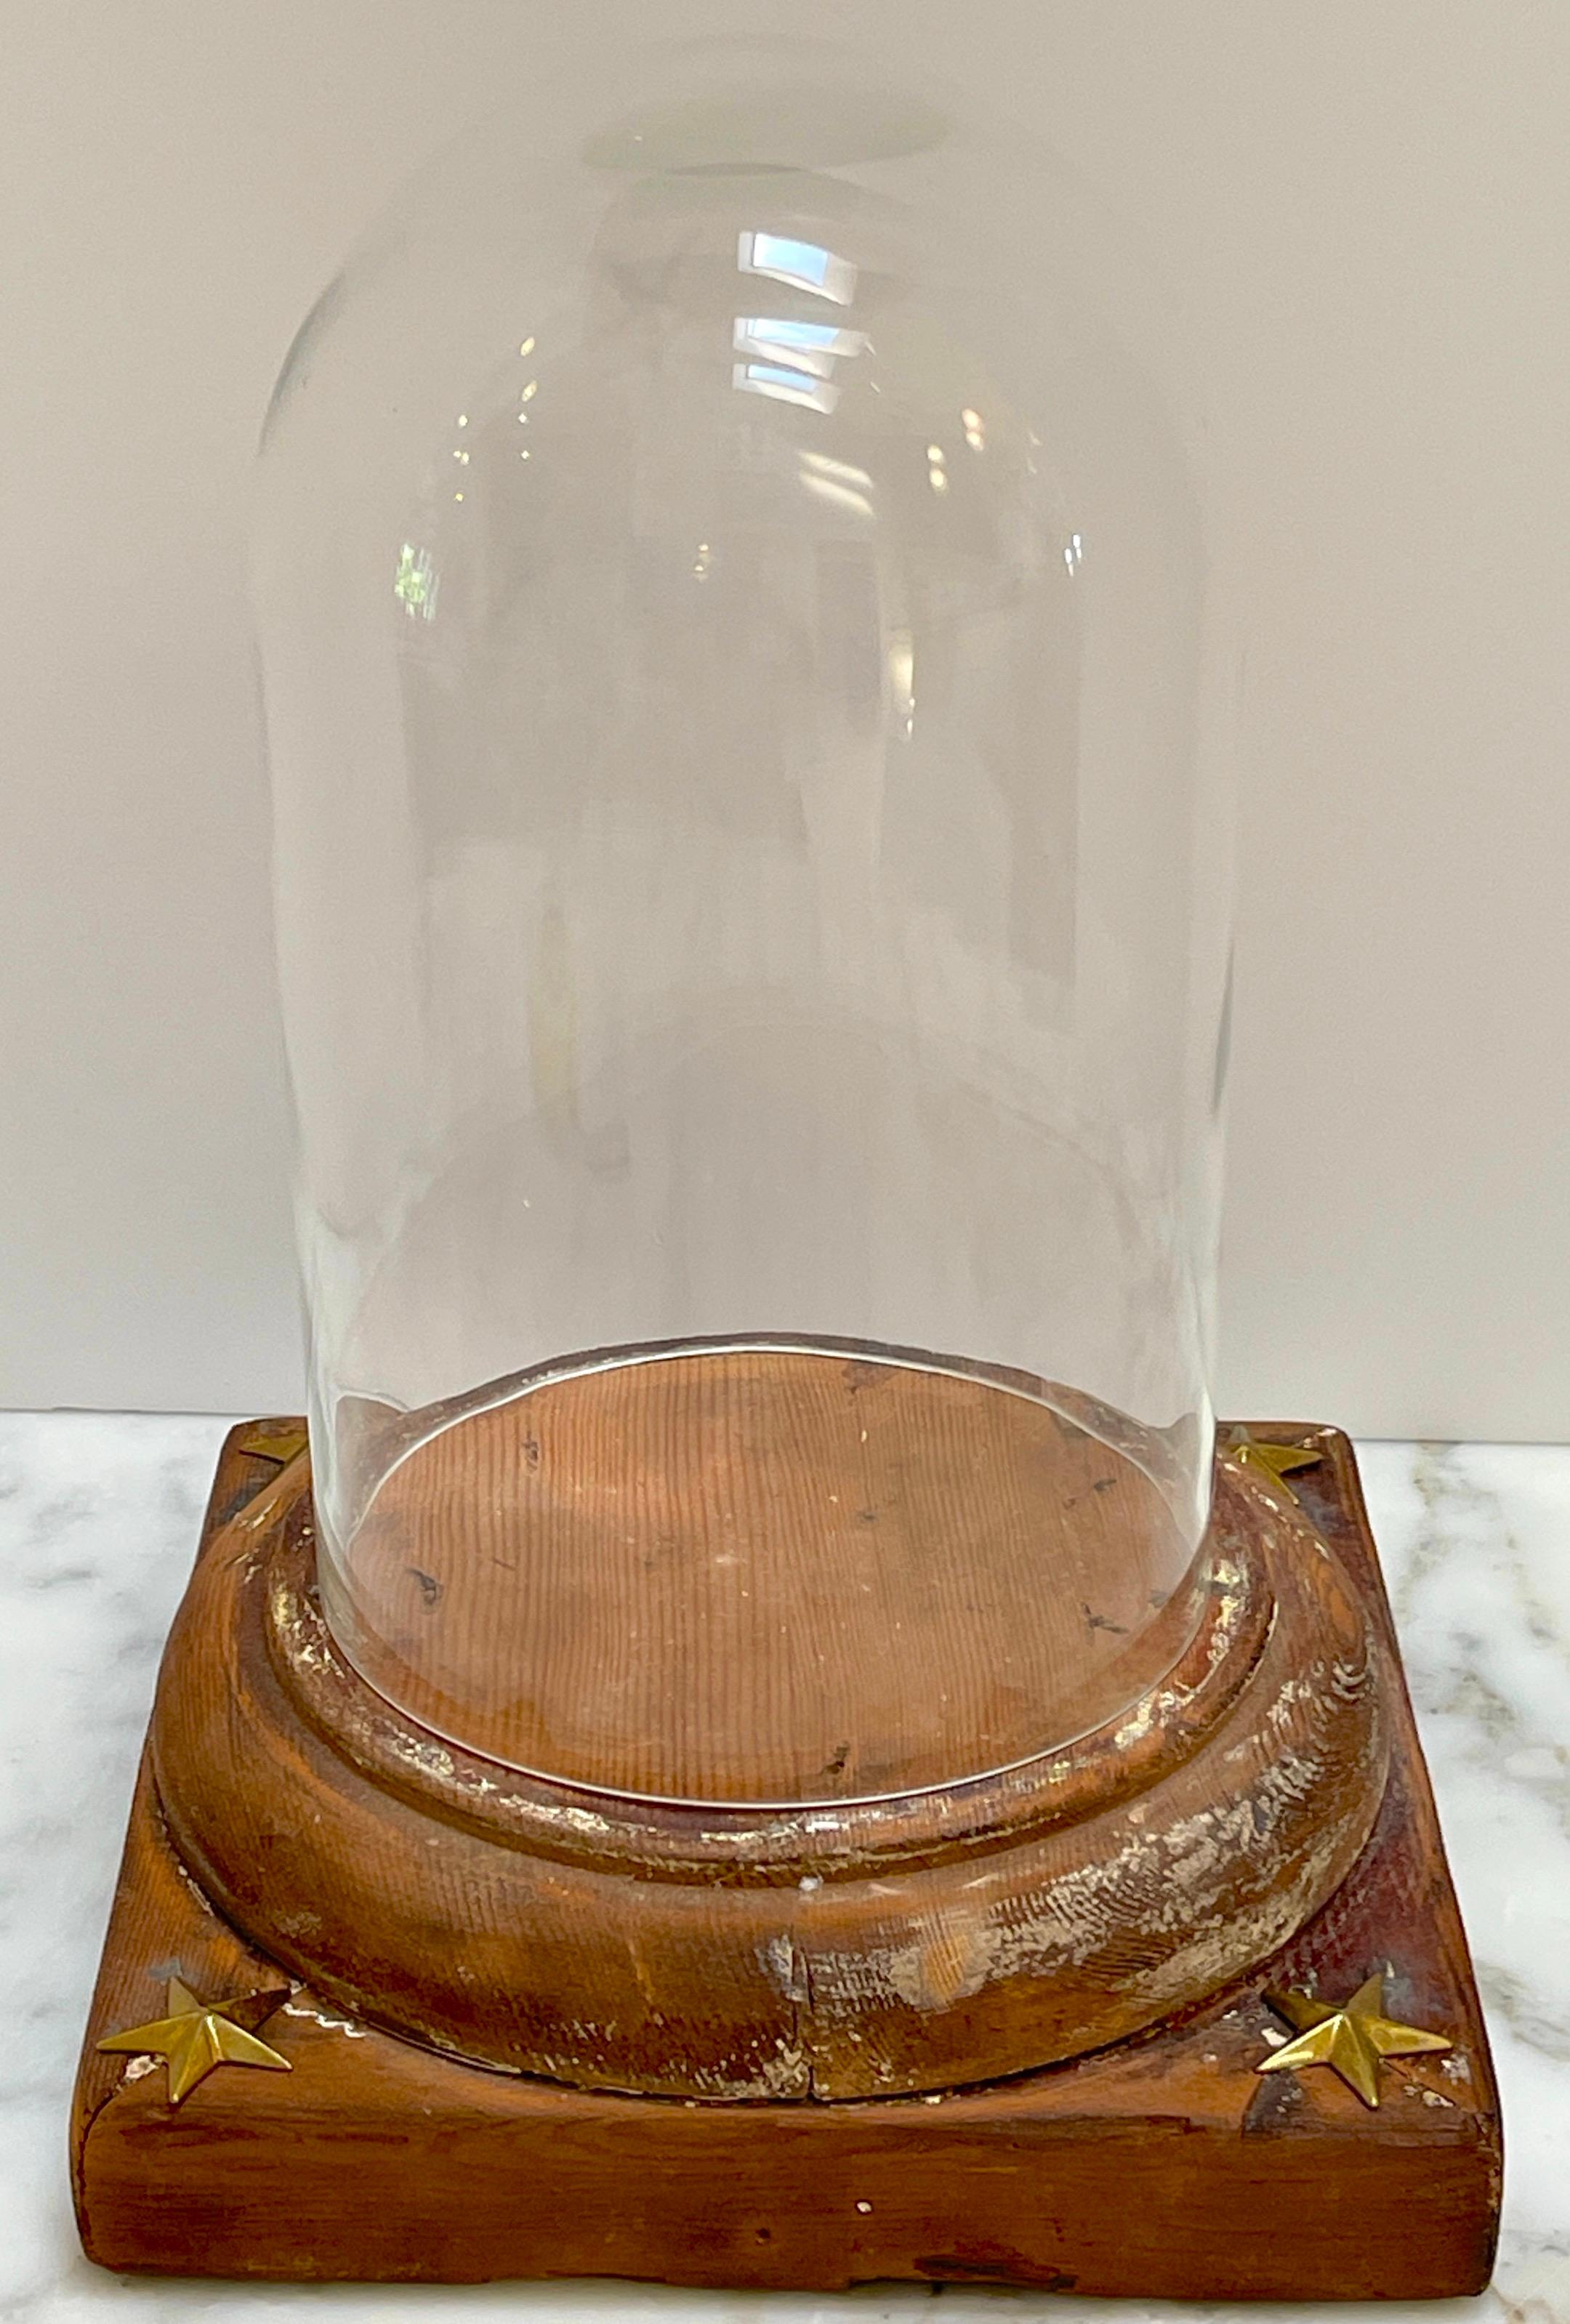 19th Century French Neoclassical Distressed Wood & Glass Cloche/Dome 
France, 1890s

A stunning piece from 19th-century France, this neoclassical distressed wood and glass cloche/dome exudes timeless beauty and elegance. Crafted in the 1890s, this